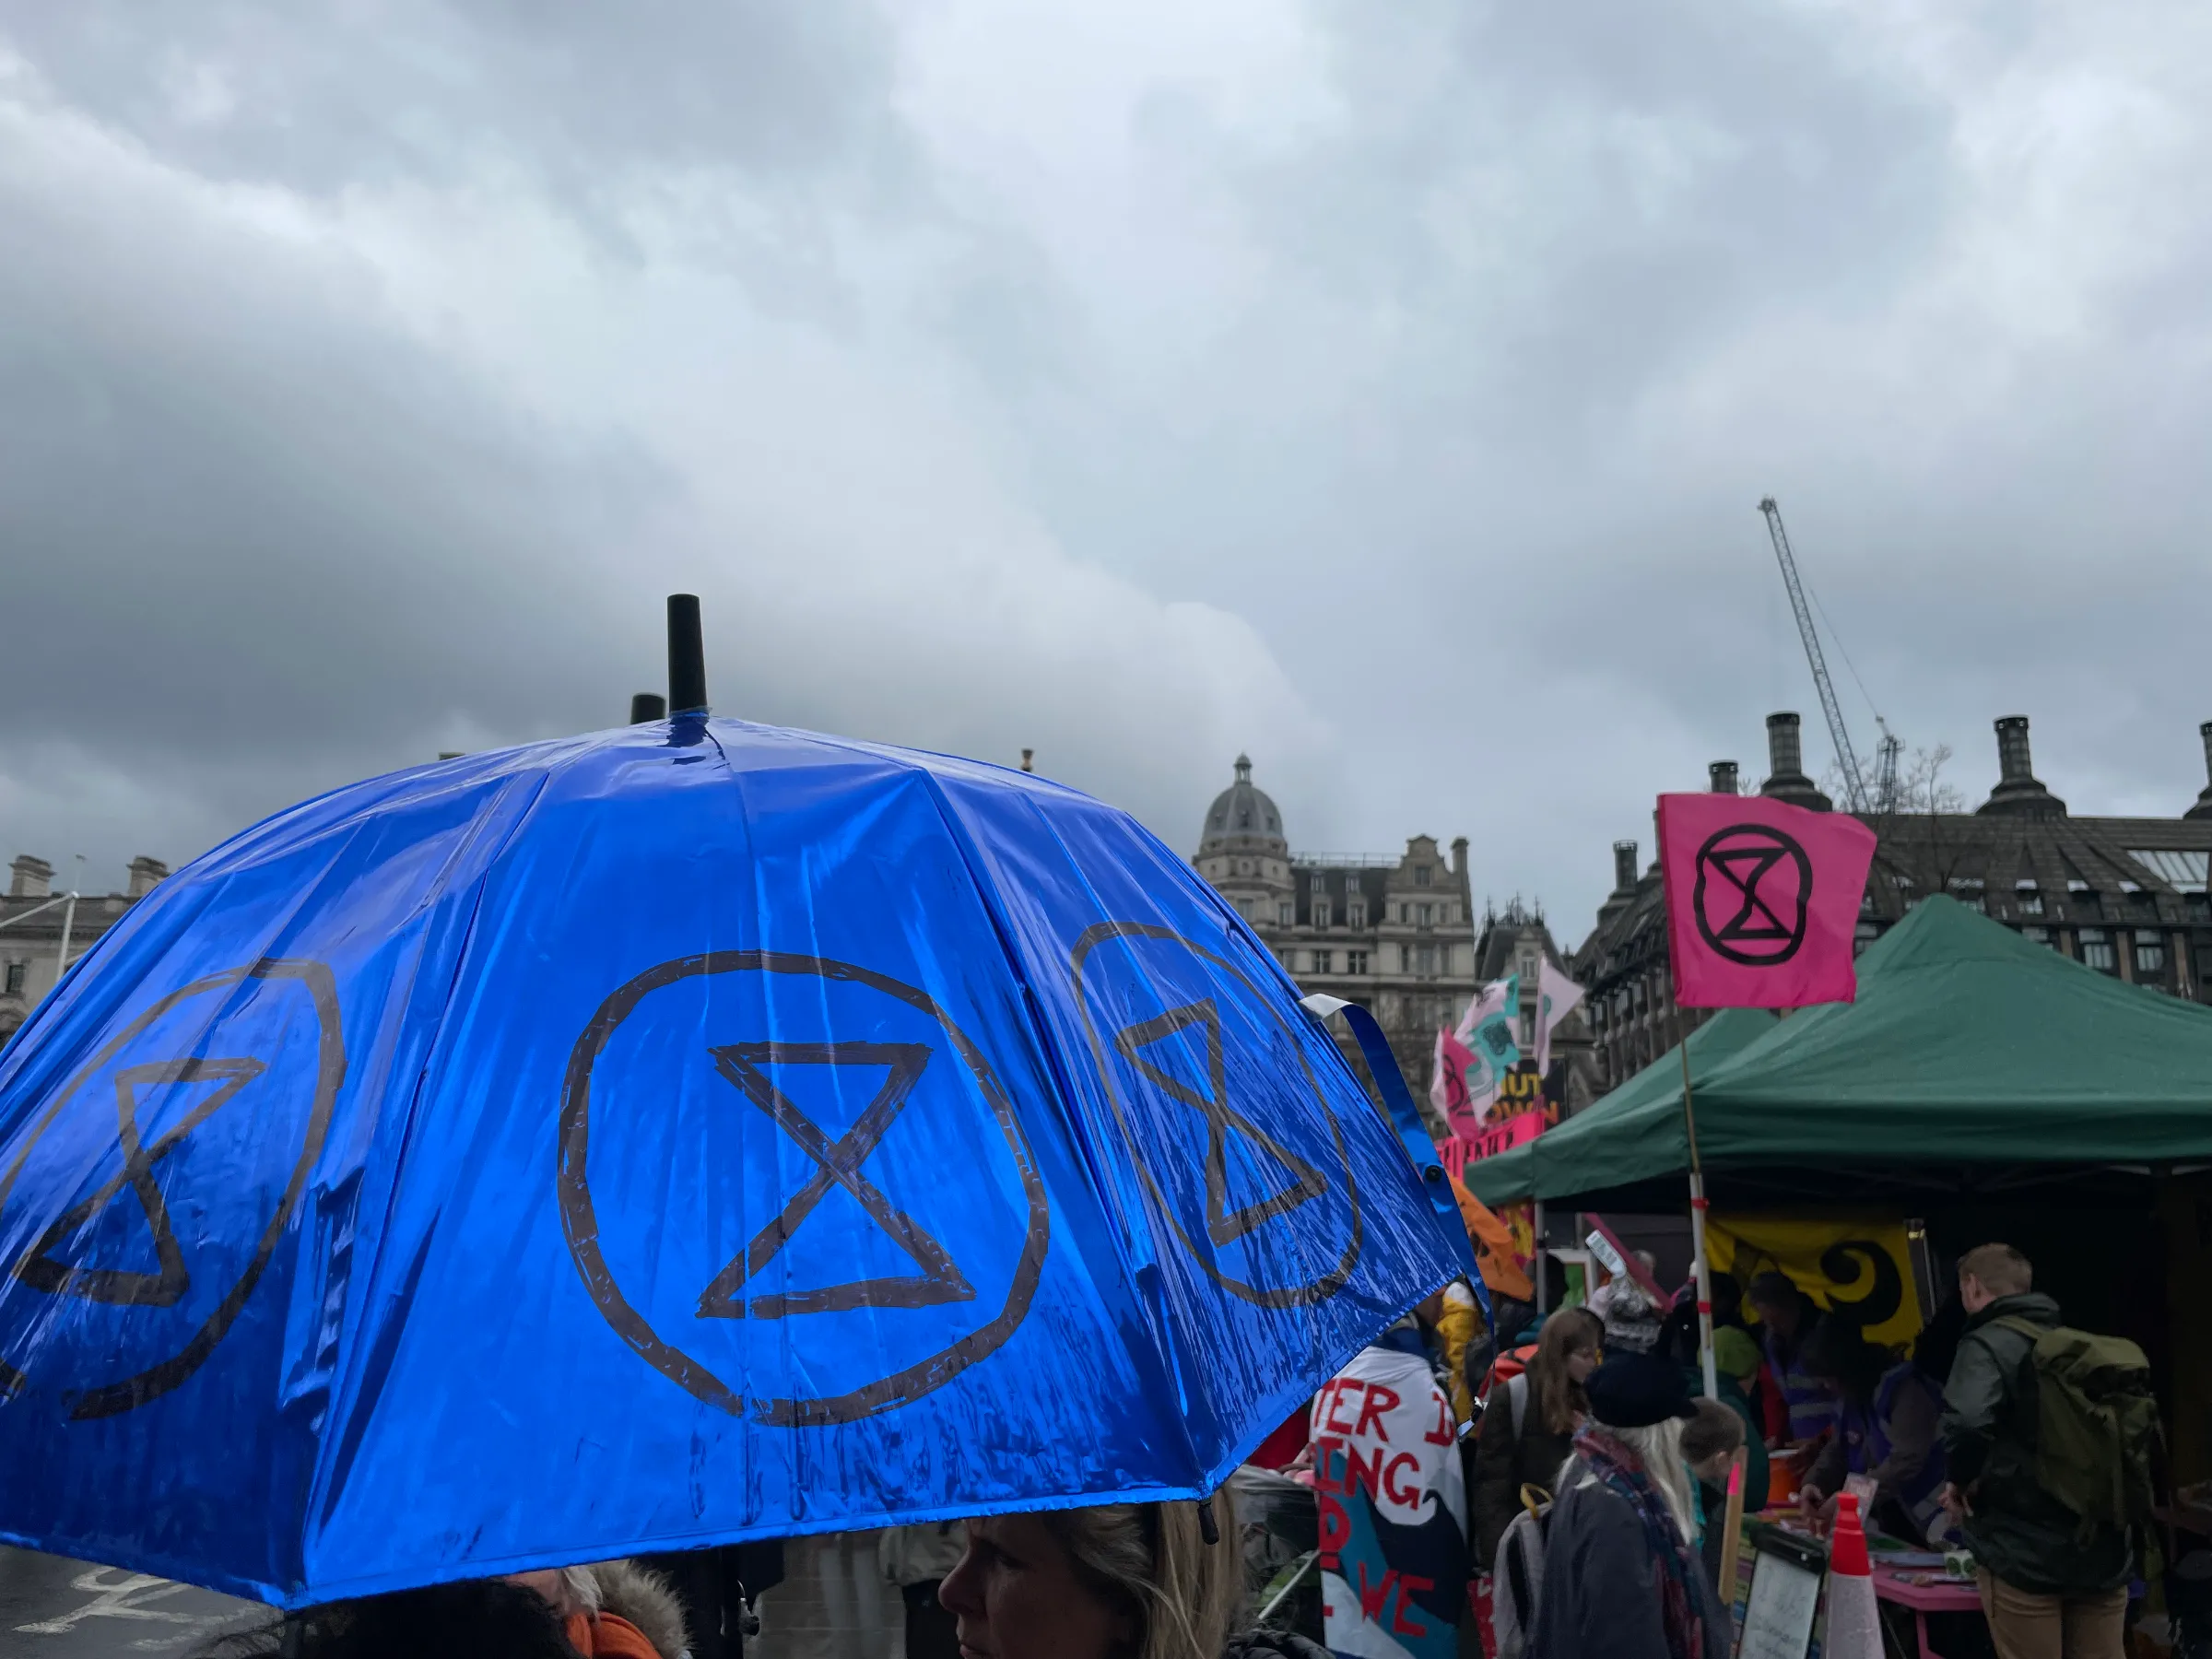 A blue umbrella marked with the Extinction Rebellion symbol was among those carried during a rainy protest organised by Extinction Rebellion outside Parliament in London on April 21, 2023. Thomson Reuters Foundation/Laurie Goering